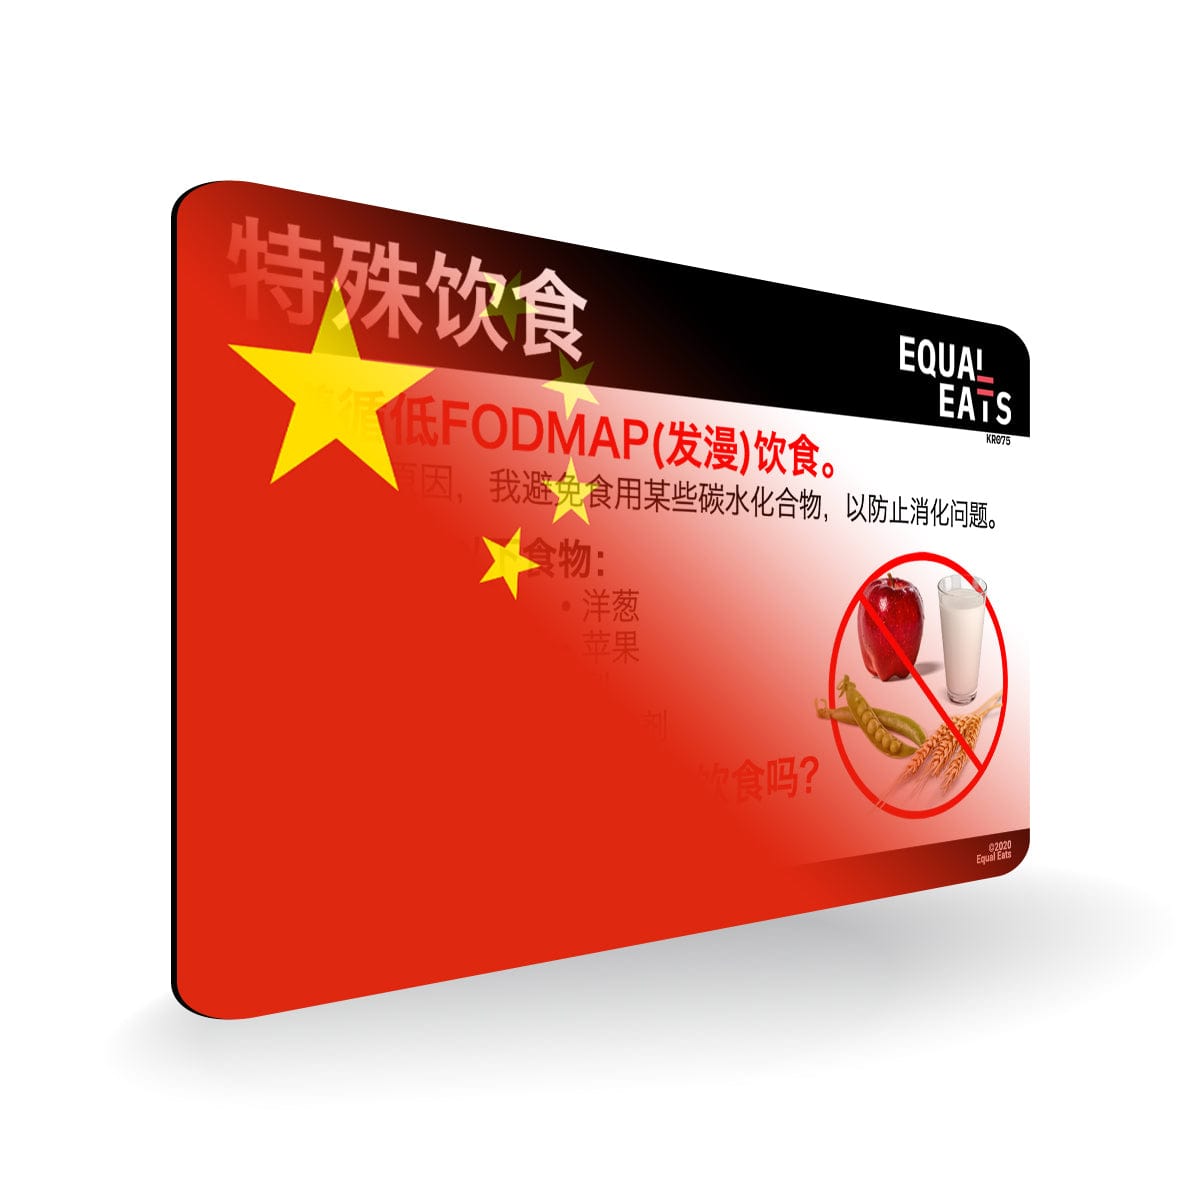 Low FODMAP Diet in Simplified Chinese. Low FODMAP Diet Card for China